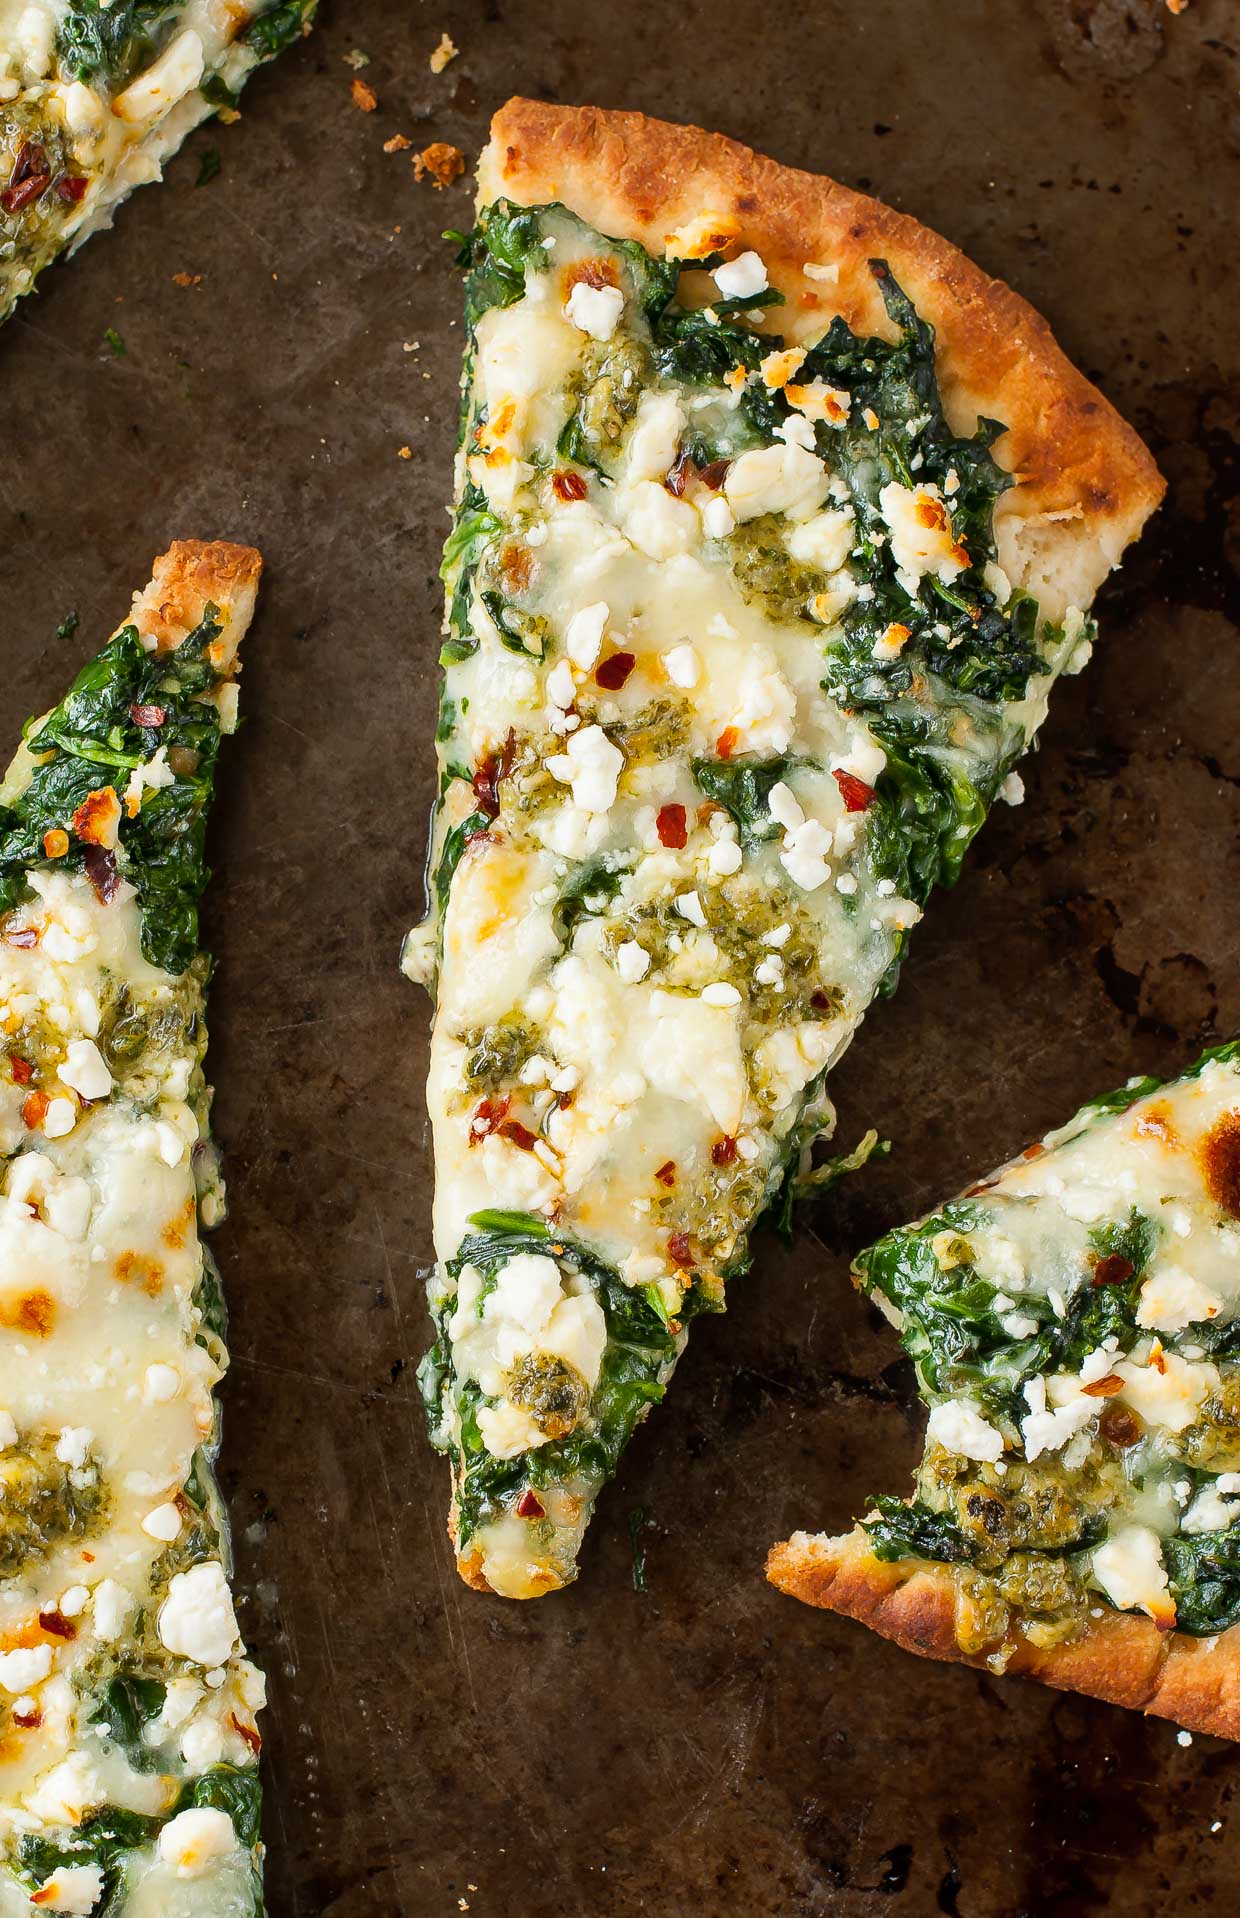 Three Cheese Pesto Spinach Flatbread Pizza. Alternate title: how to eat an entire 5oz box of spinach for lunch with out making a frickin' salad.